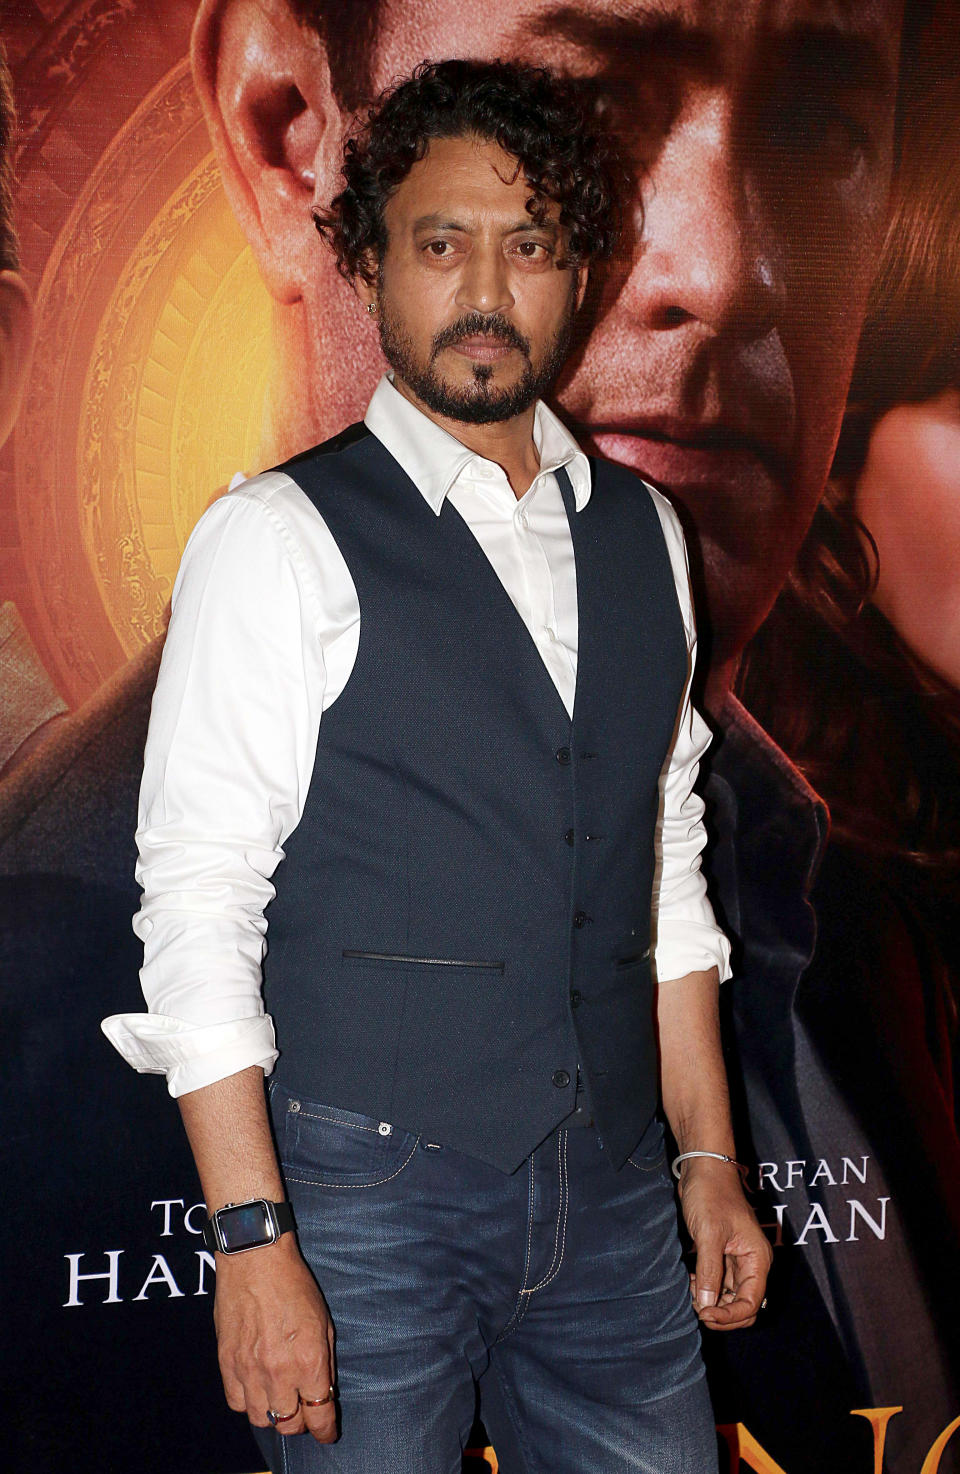 Indian Bollywood actor Irrfan Khan has died aged 53. Source: AFP via Getty Images